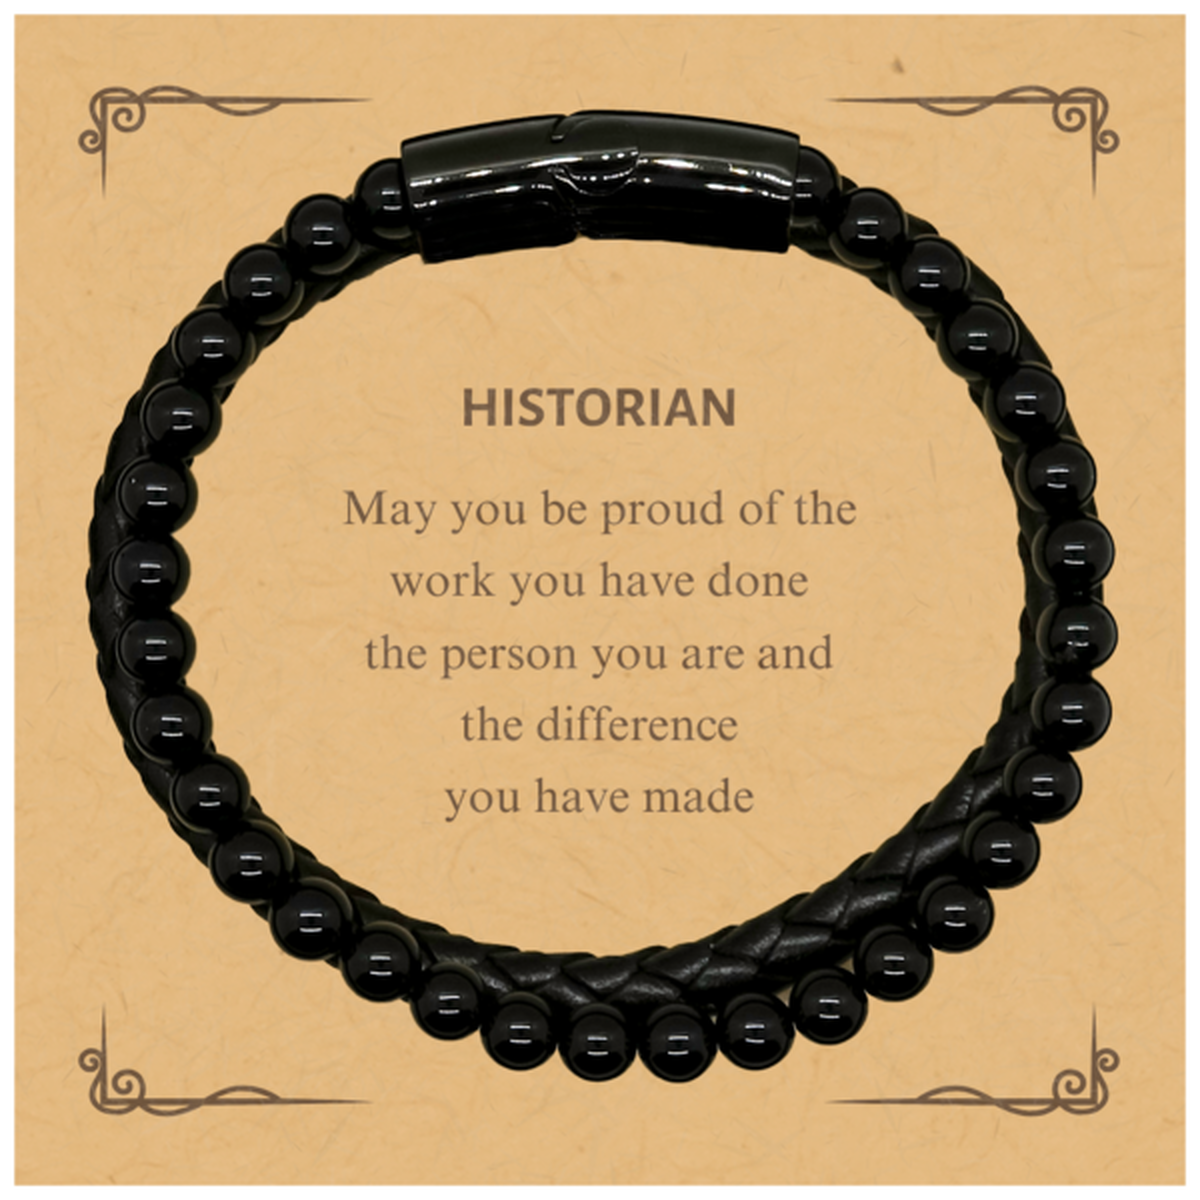 Historian May you be proud of the work you have done, Retirement Historian Stone Leather Bracelets for Colleague Appreciation Gifts Amazing for Historian